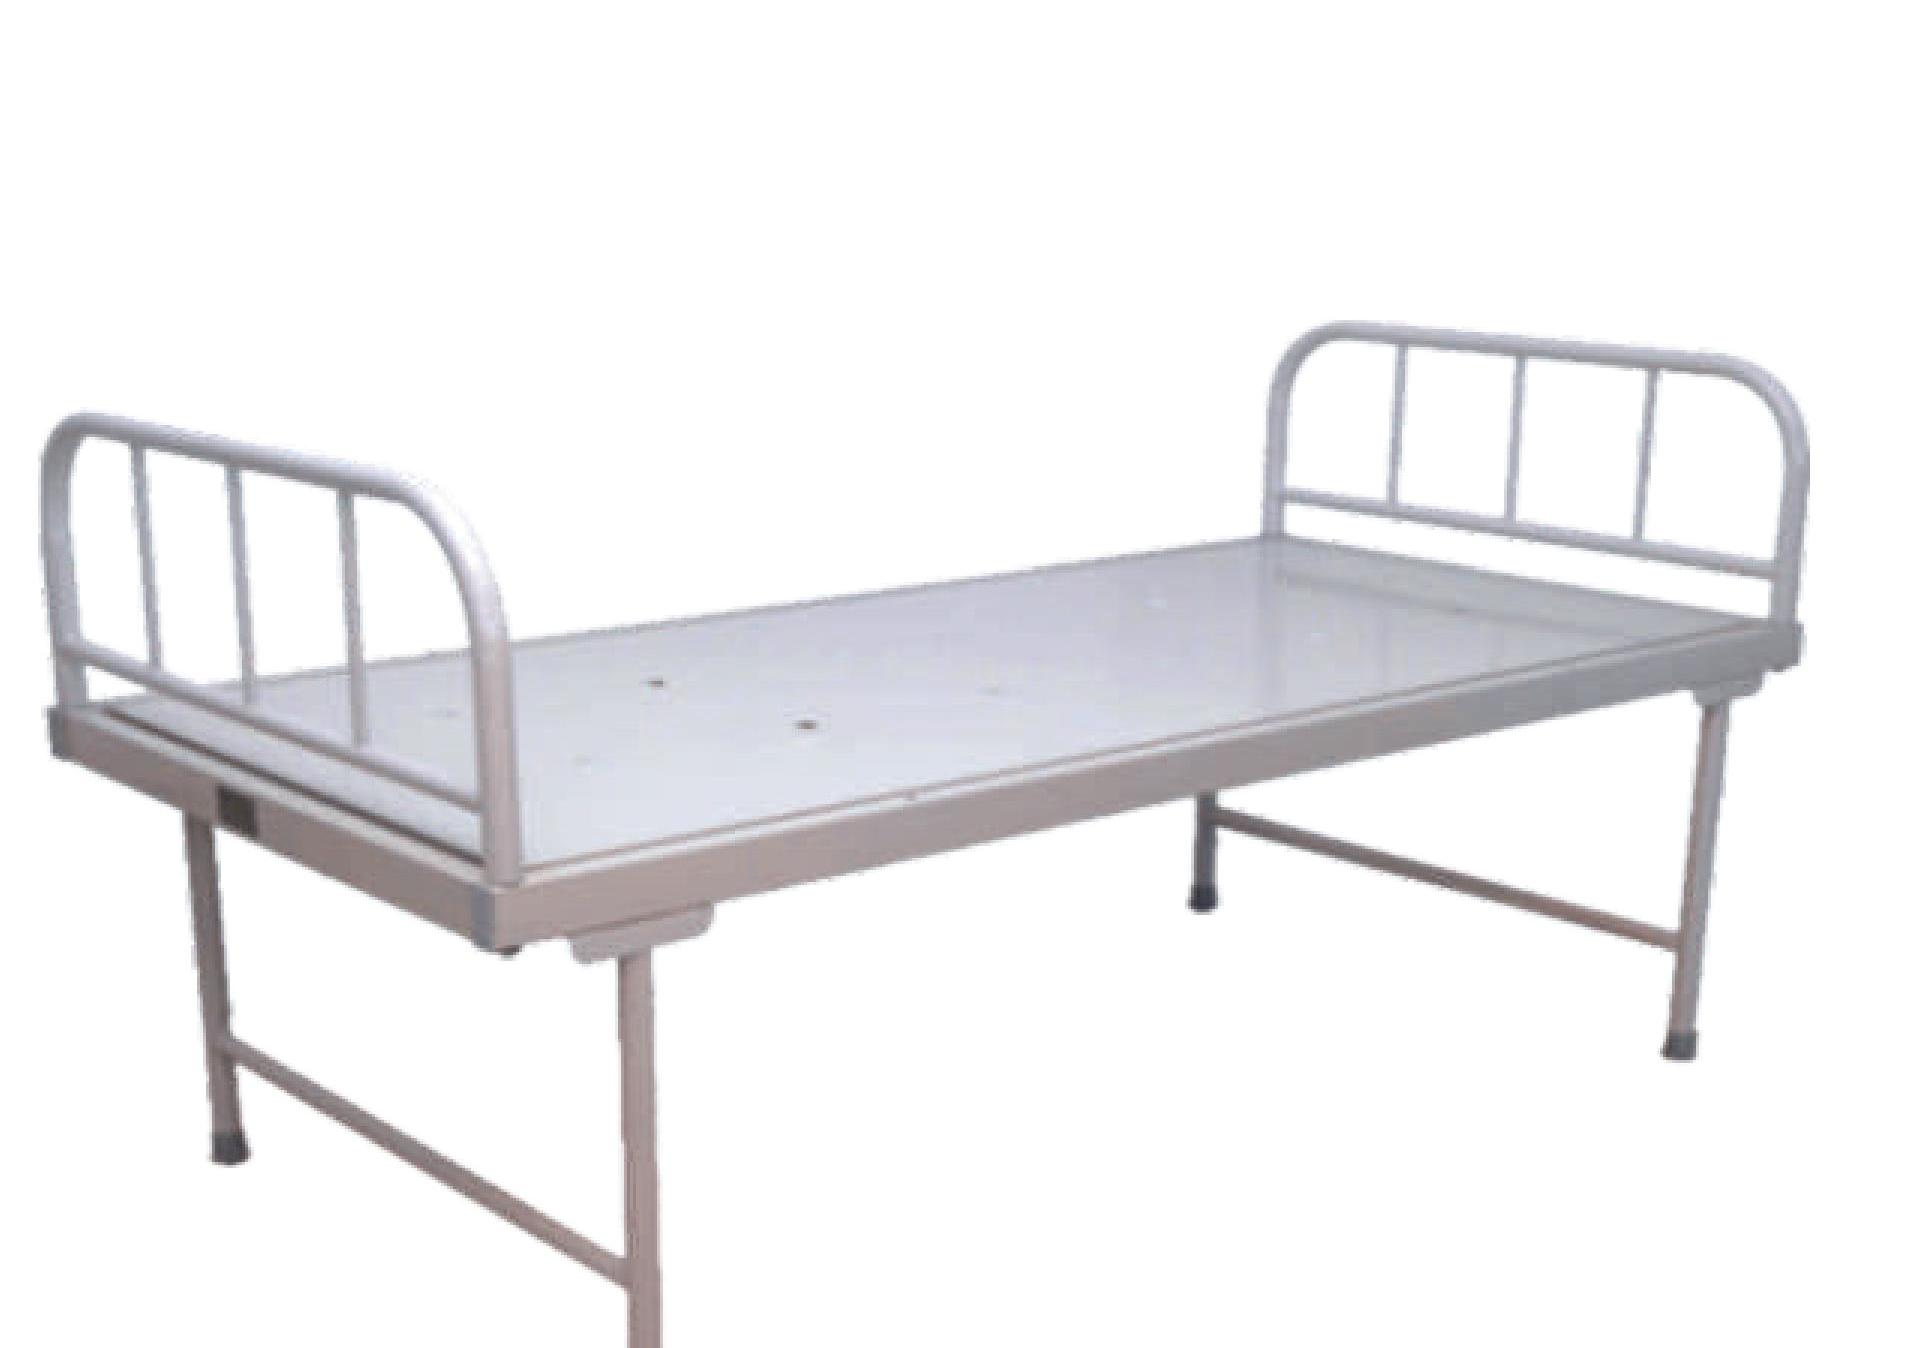 GENERAL ADULT BED